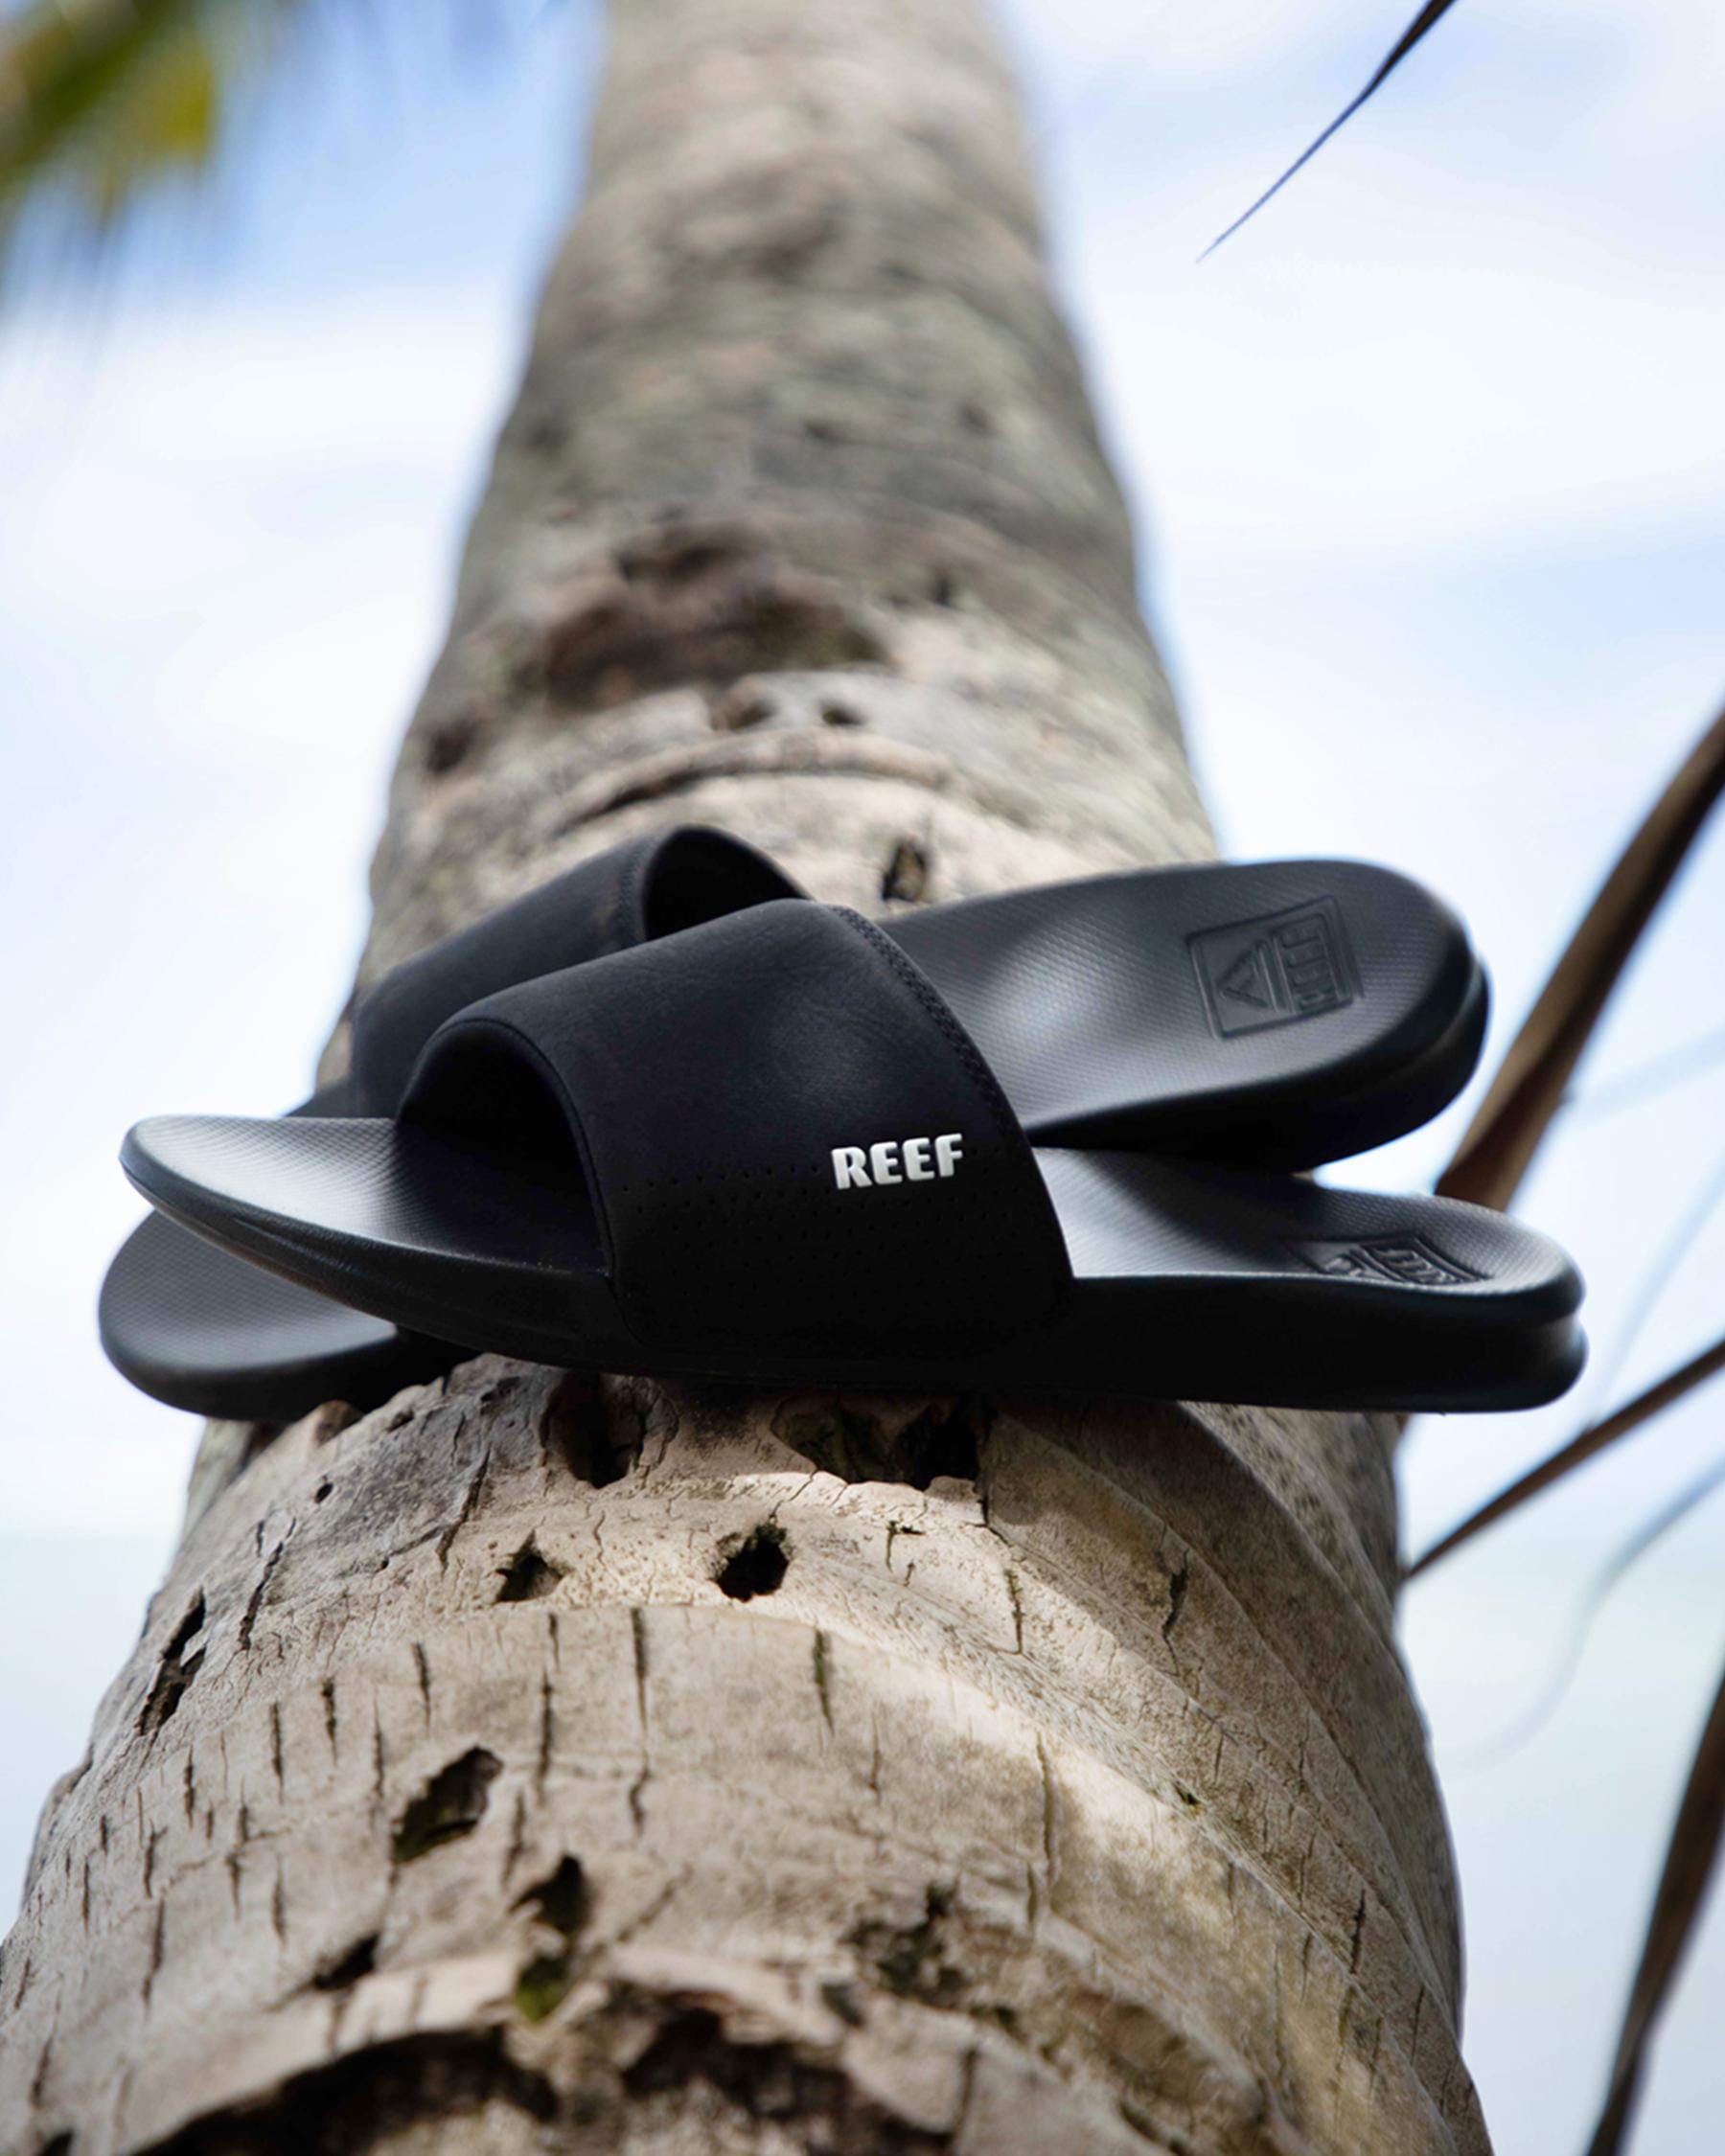 Reef One Slides In Black - Fast Shipping & Easy Returns - City Beach ...